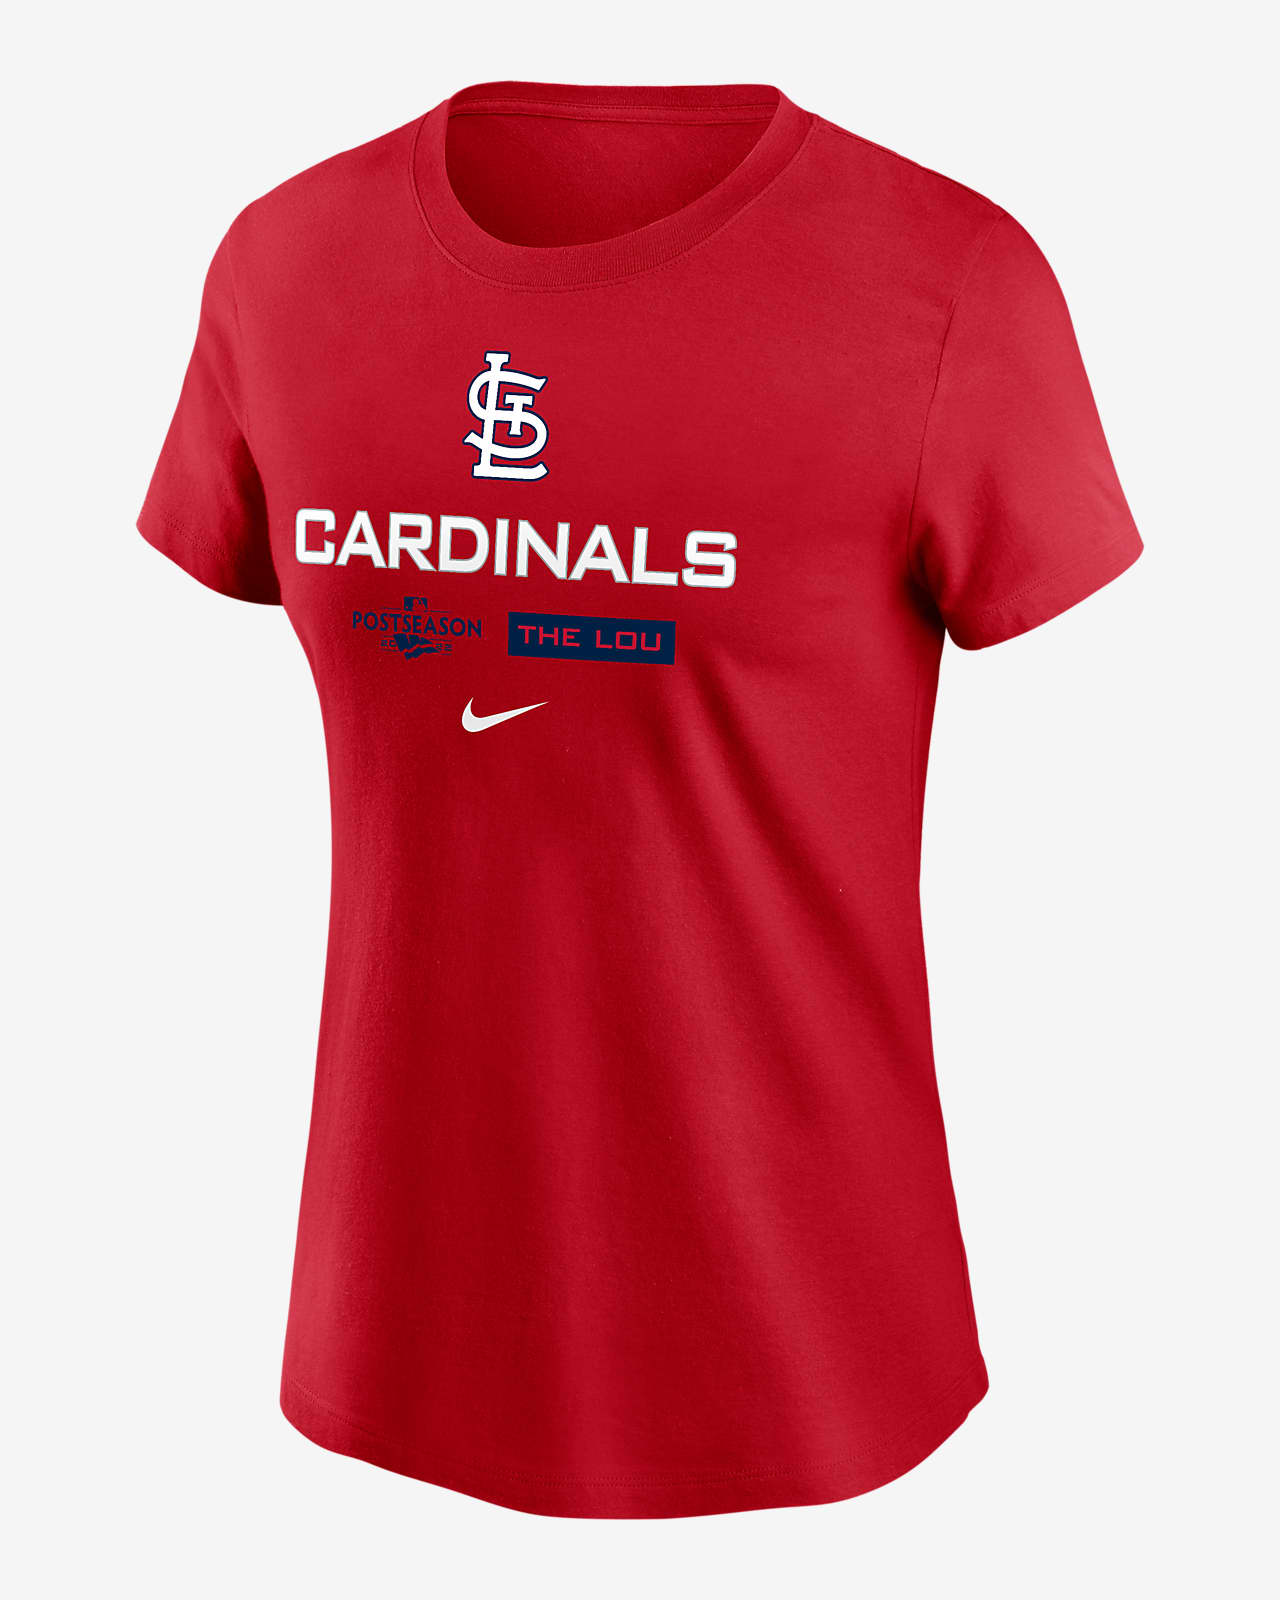 Mlb St Louis Cardinals Baseball Team Pink Ribbon Together We Fight 2023 T- shirt,Sweater, Hoodie, And Long Sleeved, Ladies, Tank Top